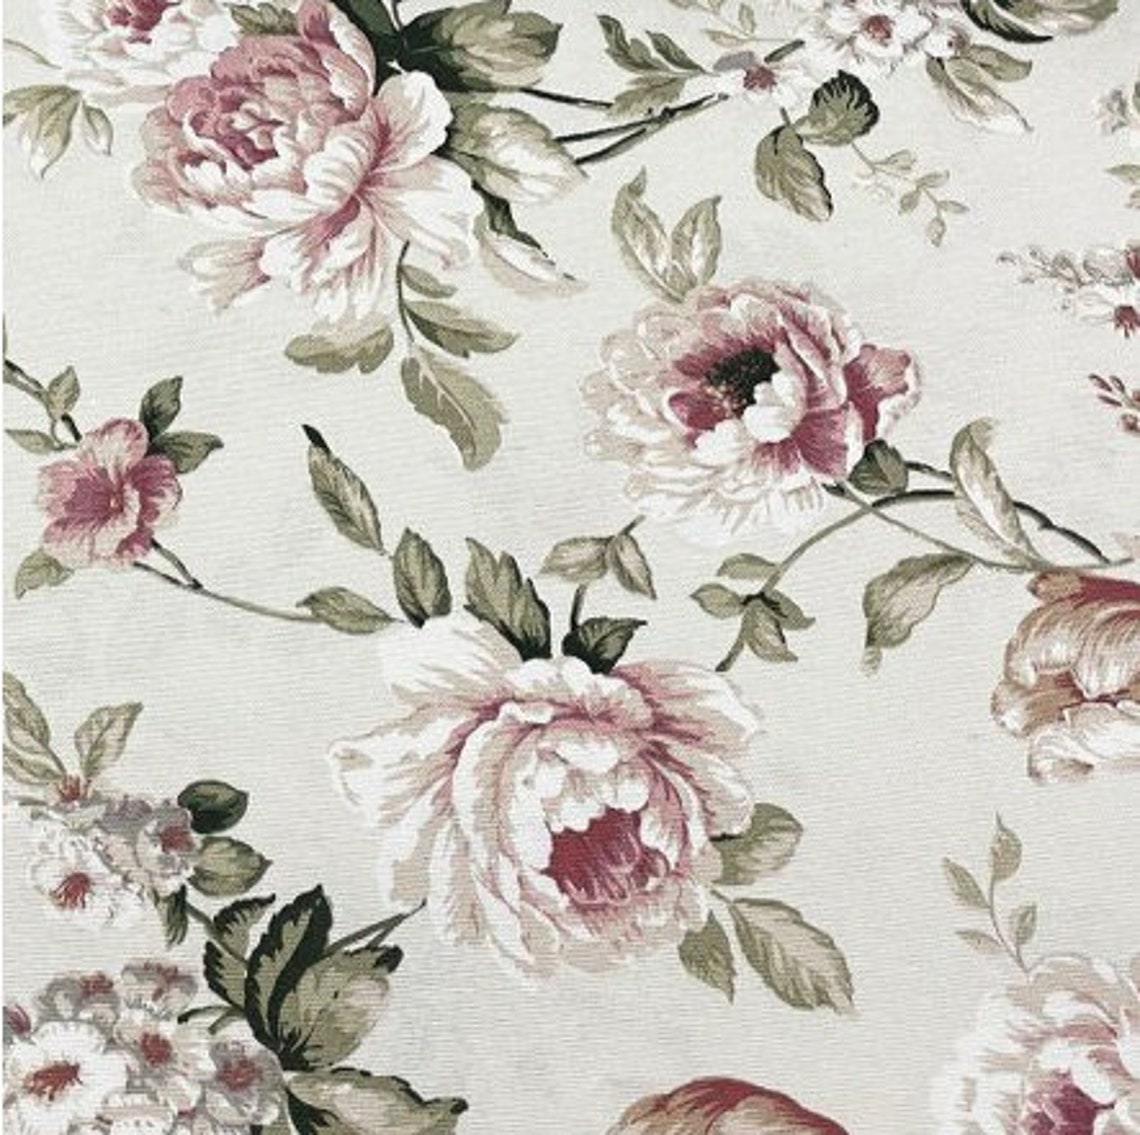 Roses Fabric by the Yard Cream Floral Fabric English Fabric - Etsy